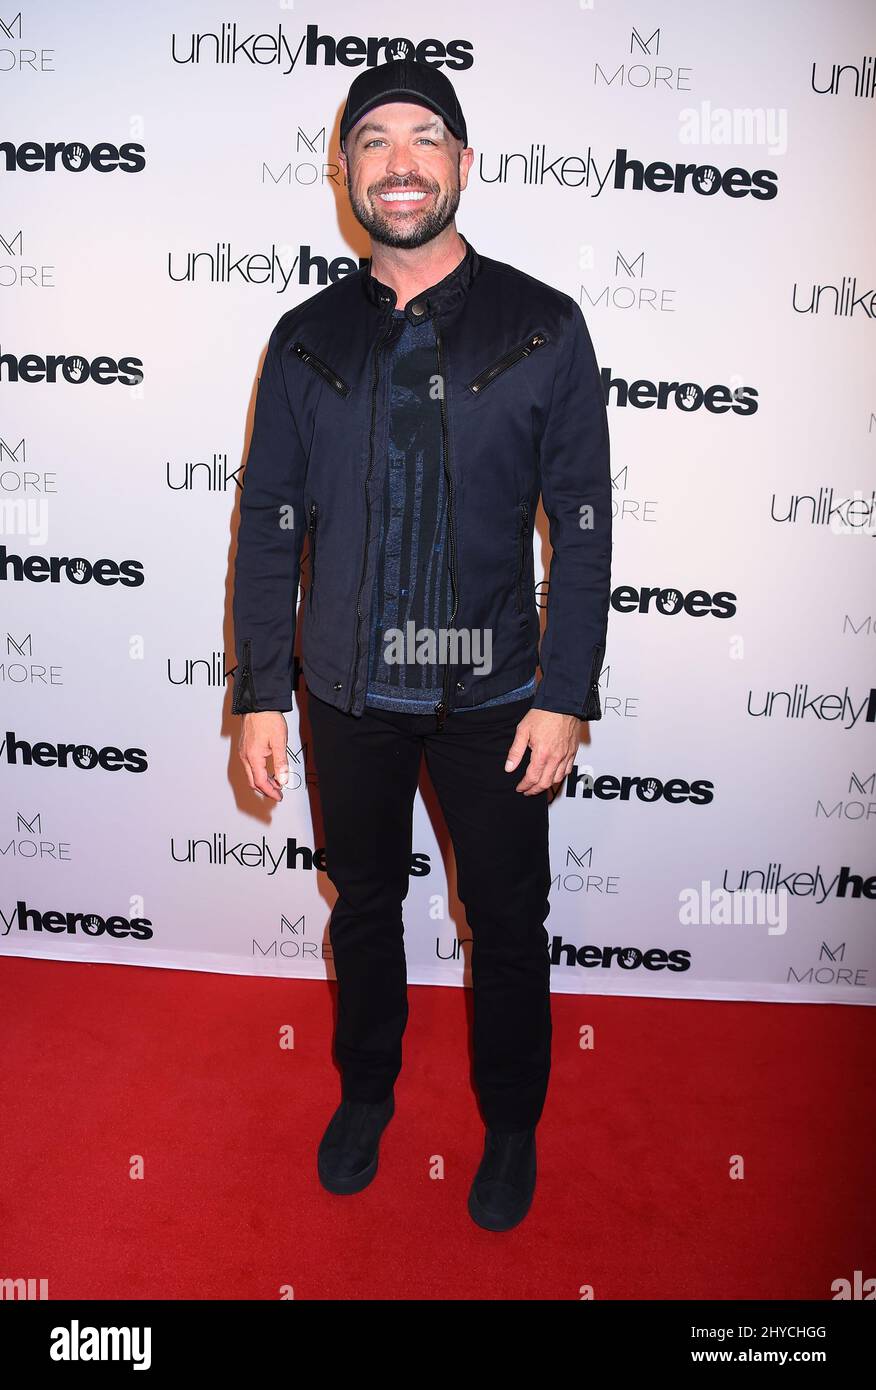 Cody Alan attending Unlikely Heroes' Nights of Freedom, presented by MORE Company, held at the City Winery in Nashville, Tennessee Stock Photo